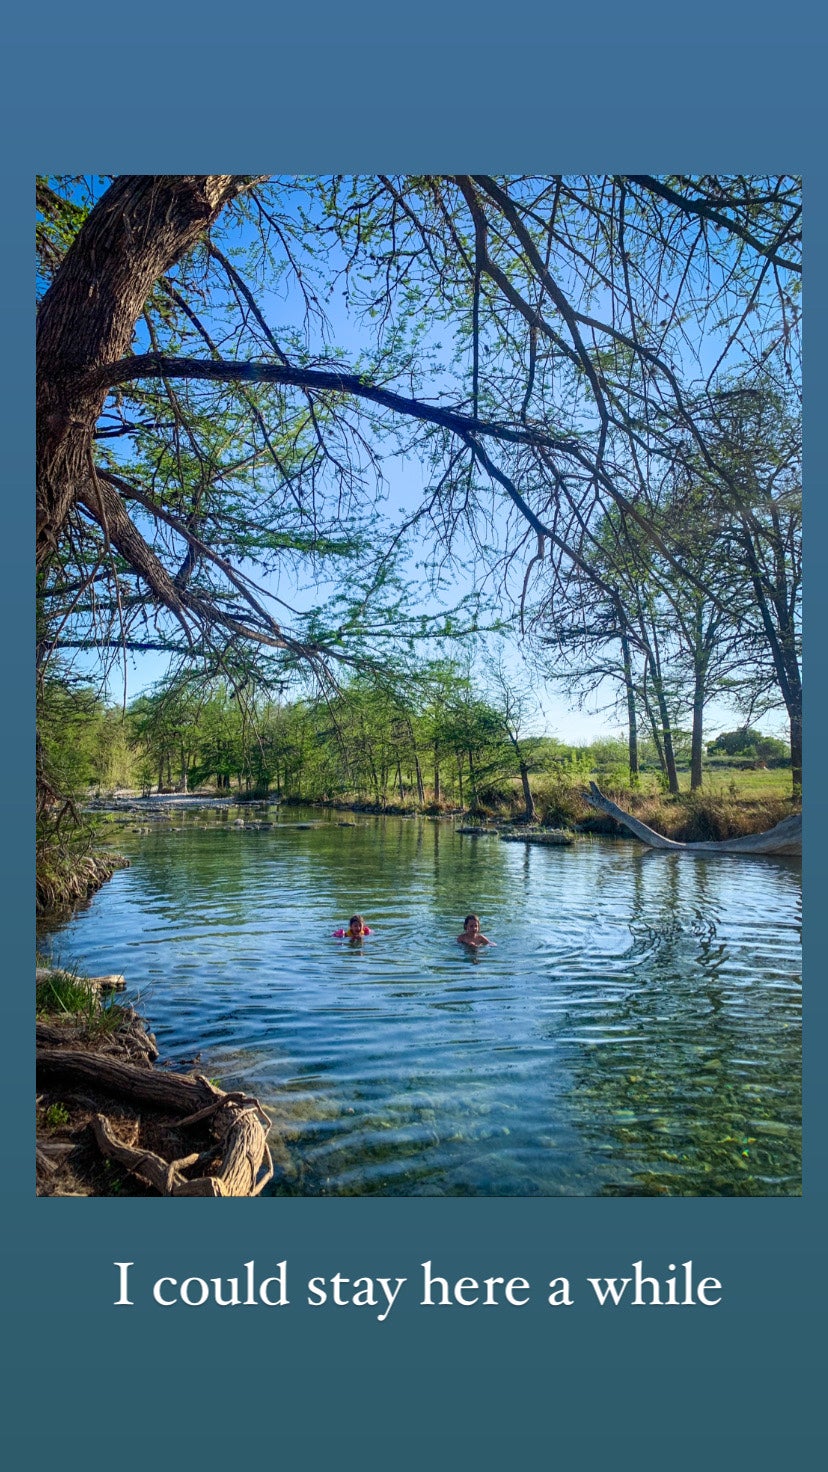 Camper submitted image from Clearwater Ranch Resort on the Frio River   - 2